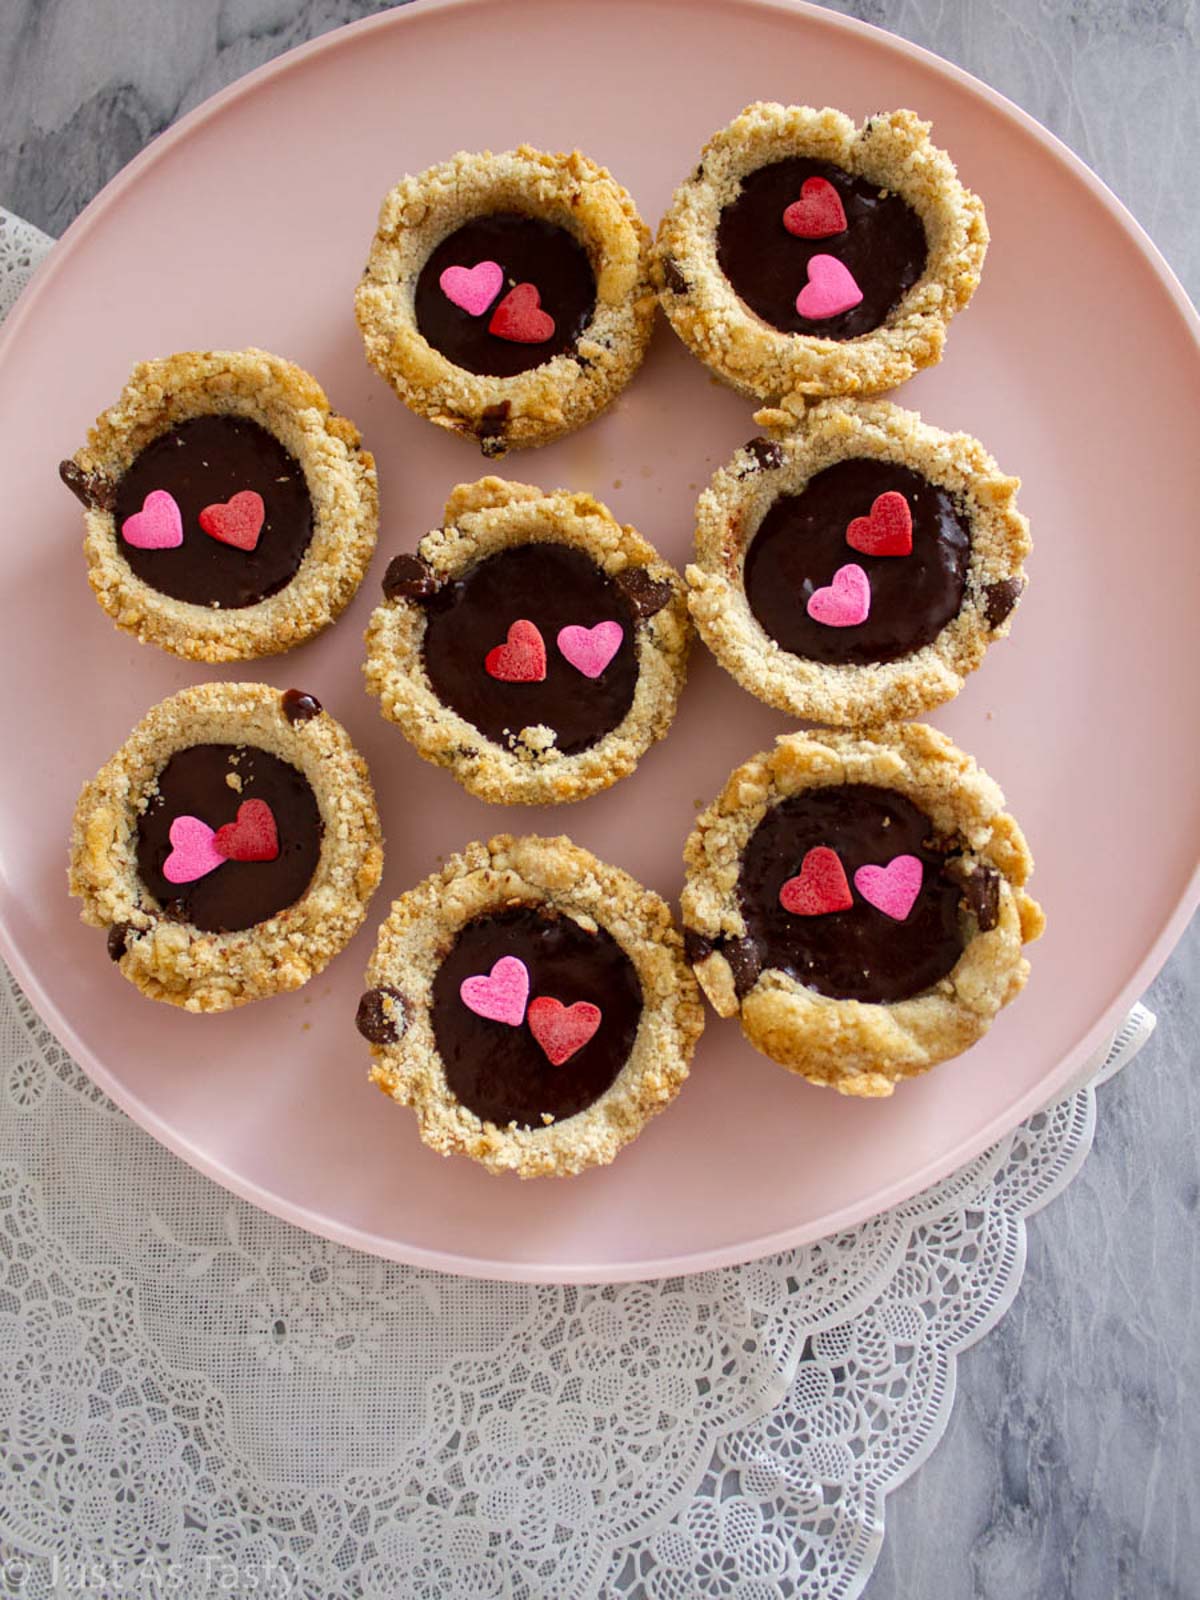 Chocolate chip cookie cups filled with chocolate ganache on a pink plate.